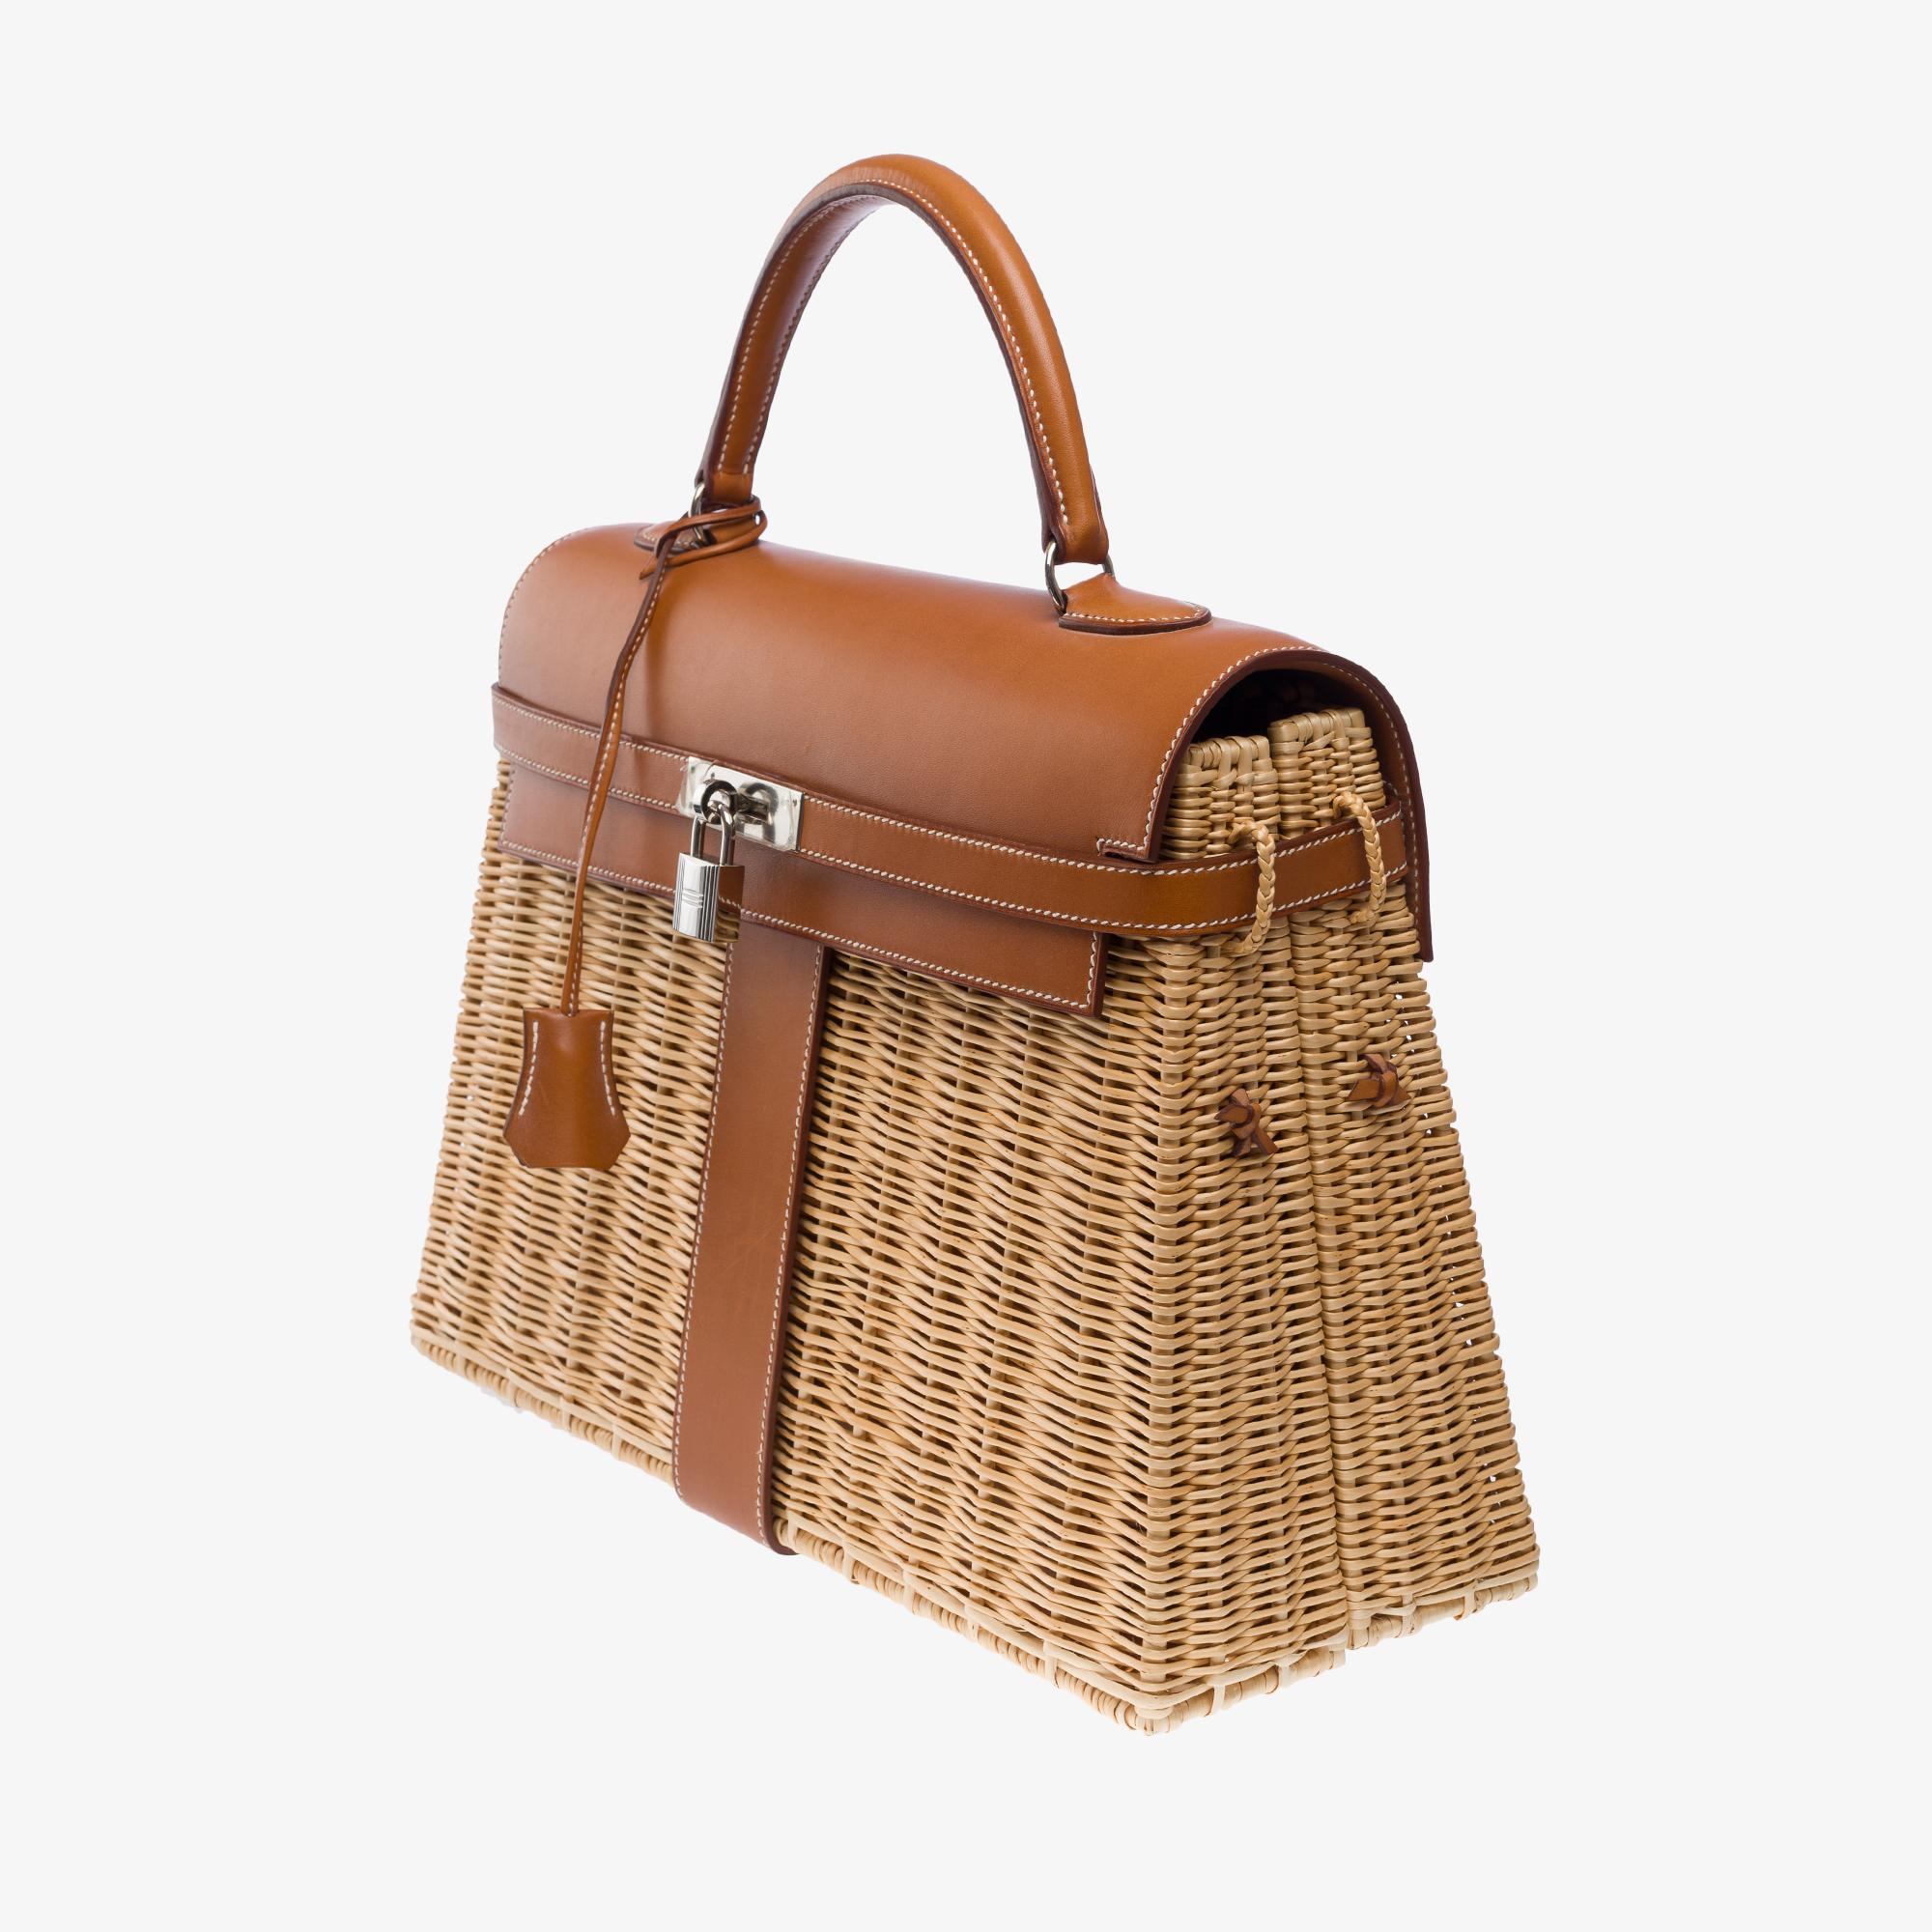 Rare Hermes Kelly 35 Picnic in wicker and barenia leather , SHW 1